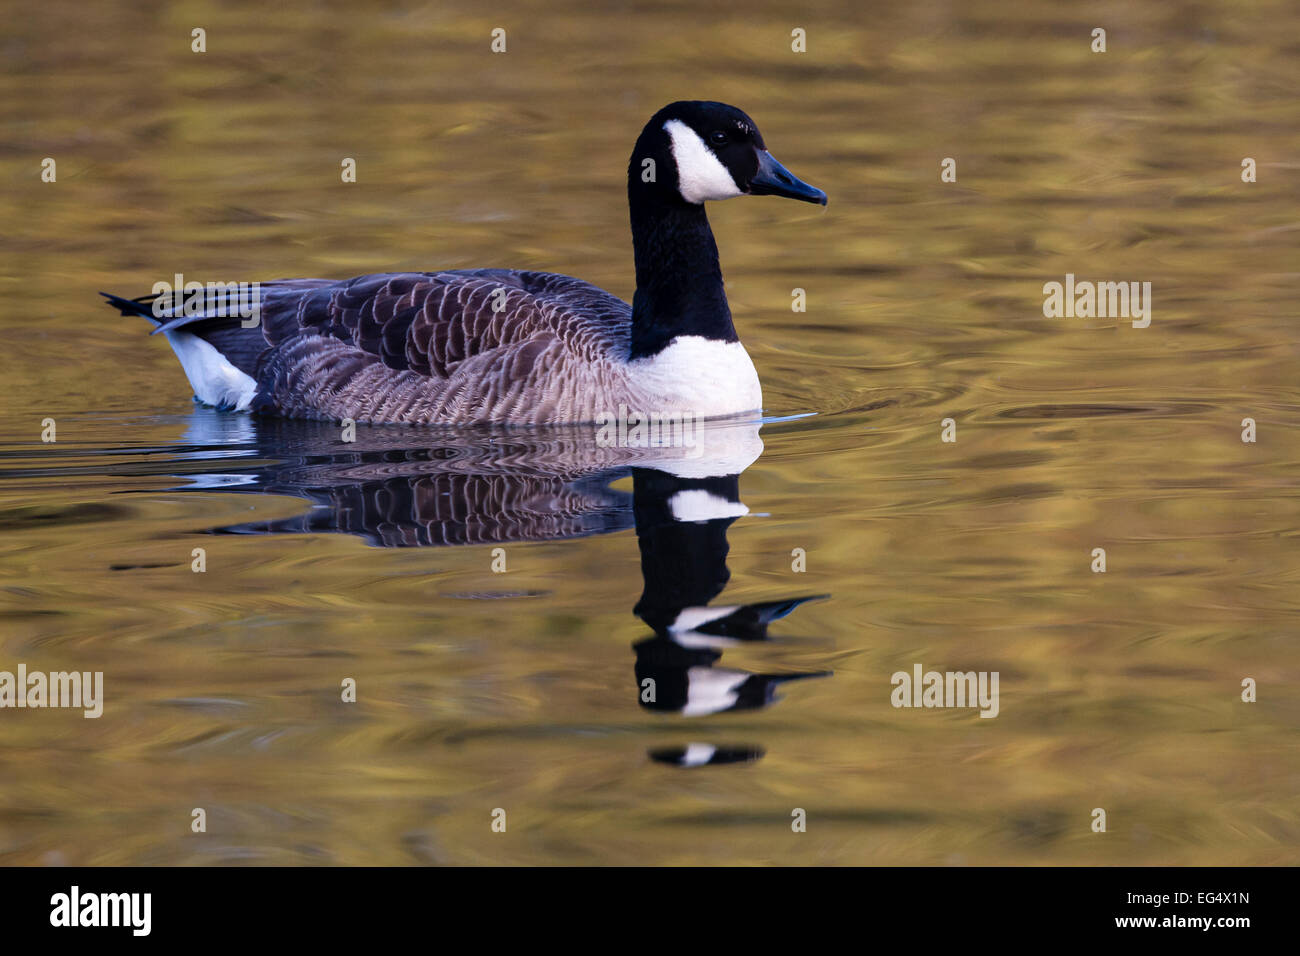 Canada goose (Branta canadensis) swims on calm water Stock Photo